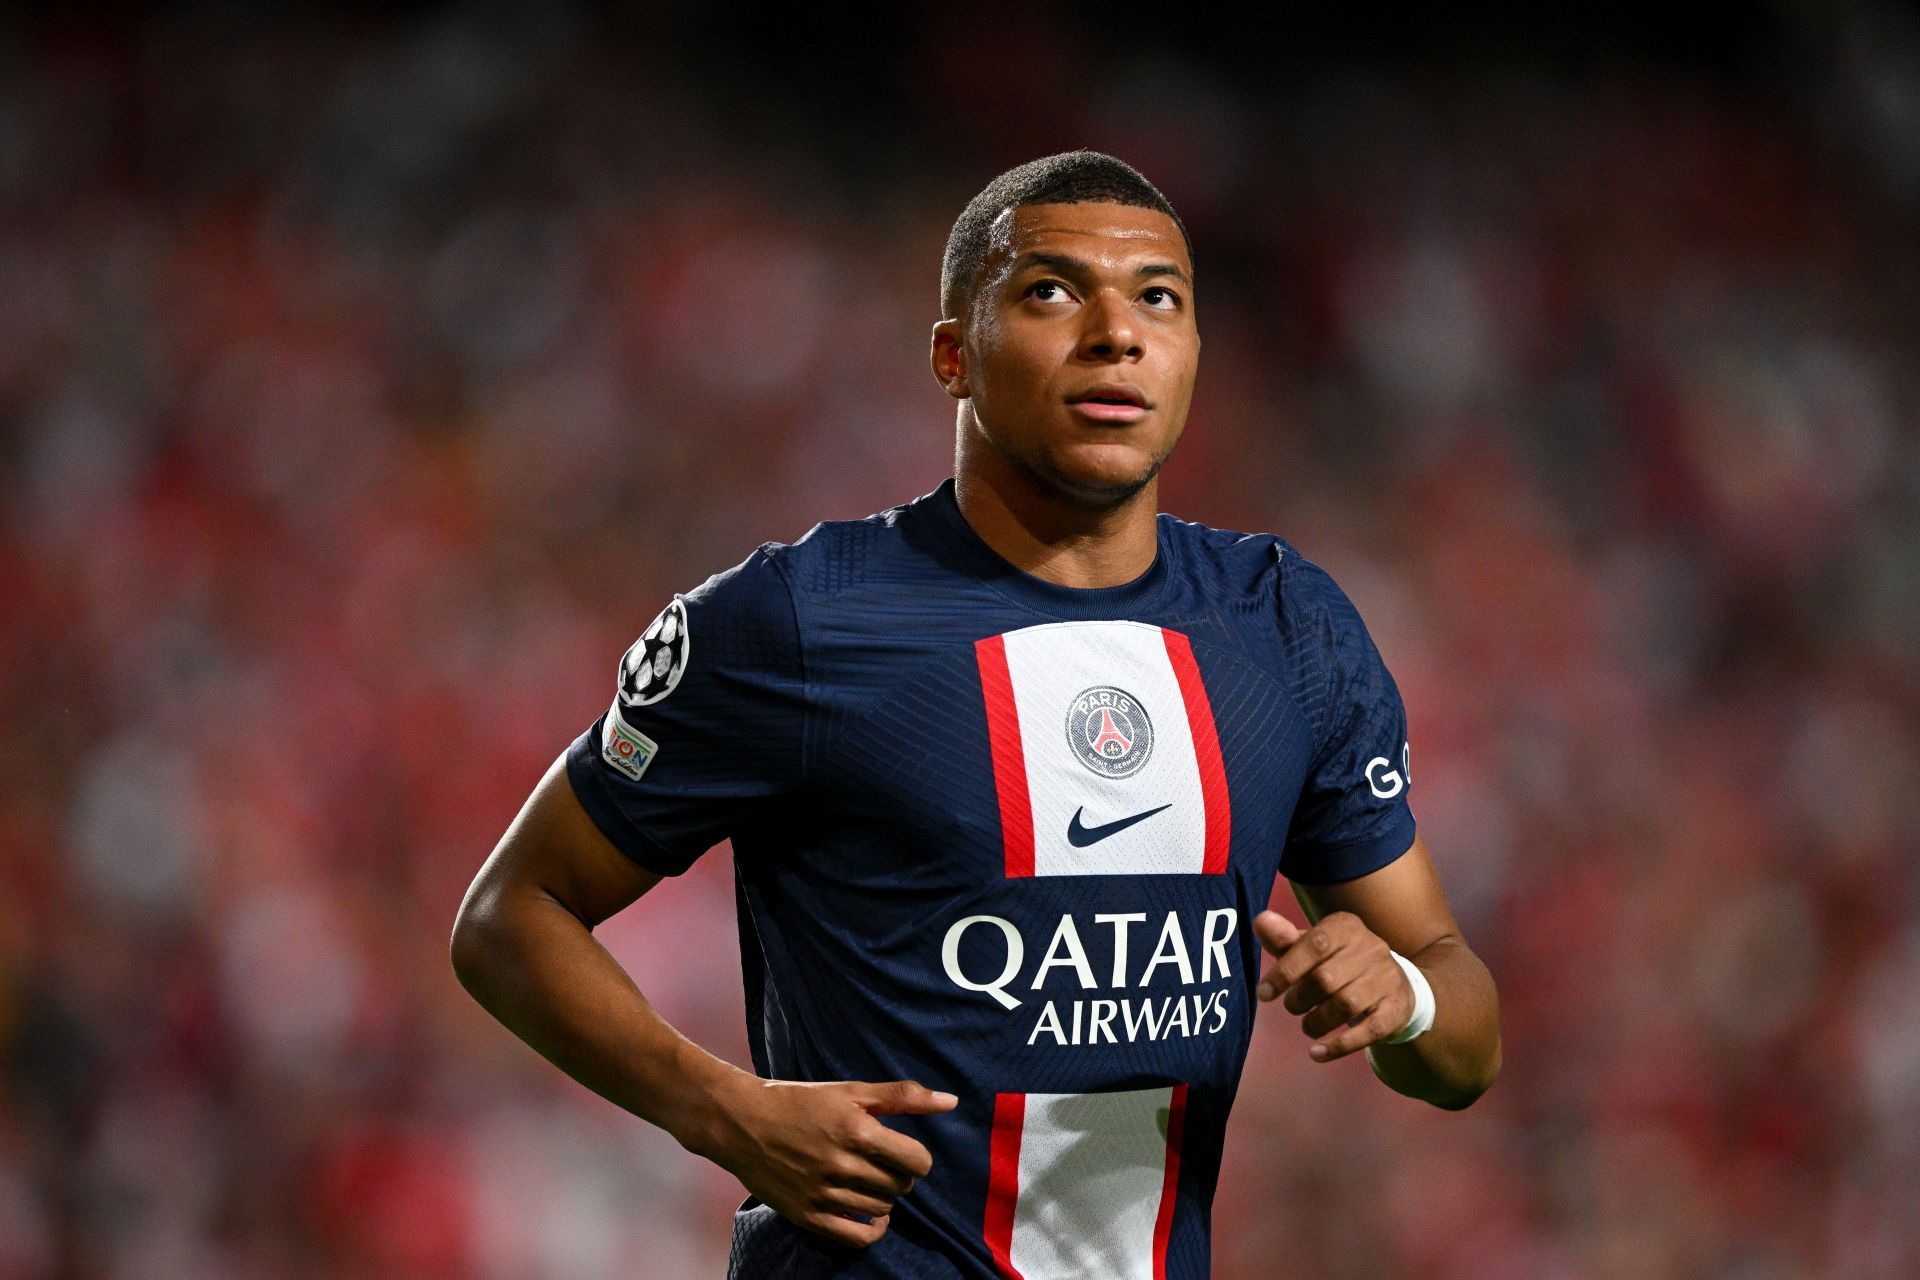 Kylian Mbappe has enjoyed a solid start to the season.